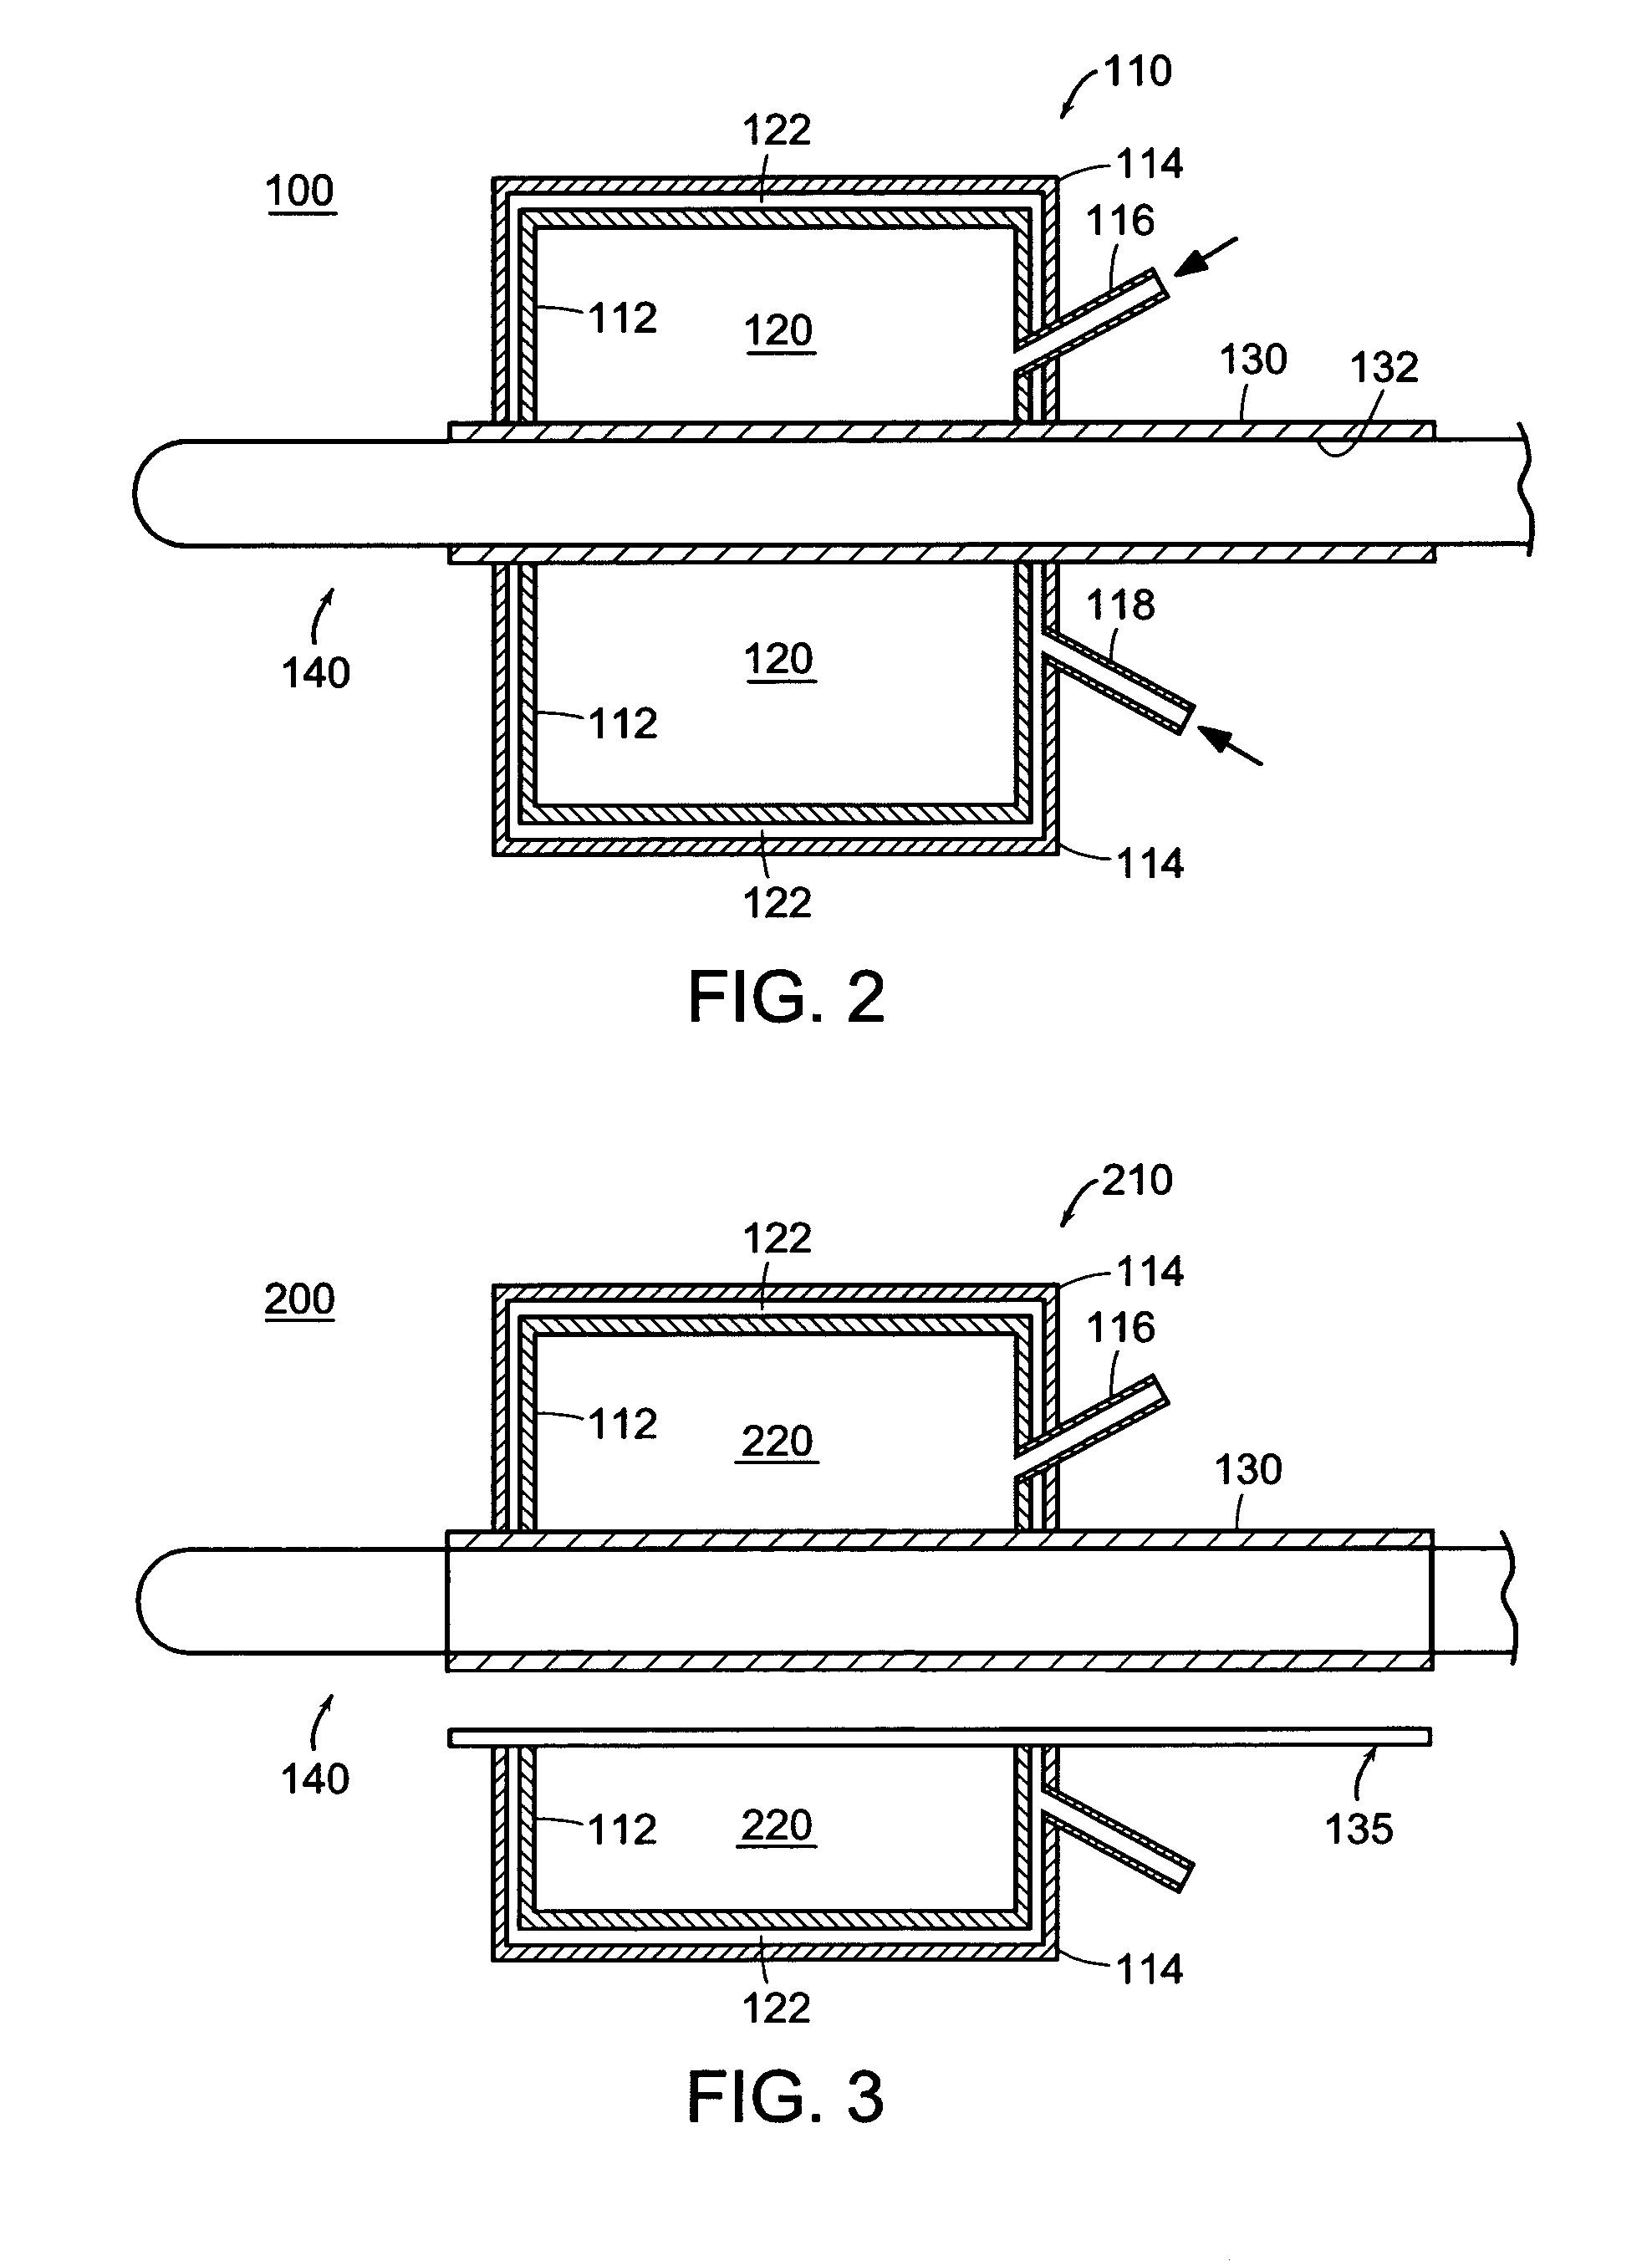 Device, systems and methods for localized heating of a vessel and/or in combination with MR/NMR imaging of the vessel and surrounding tissue